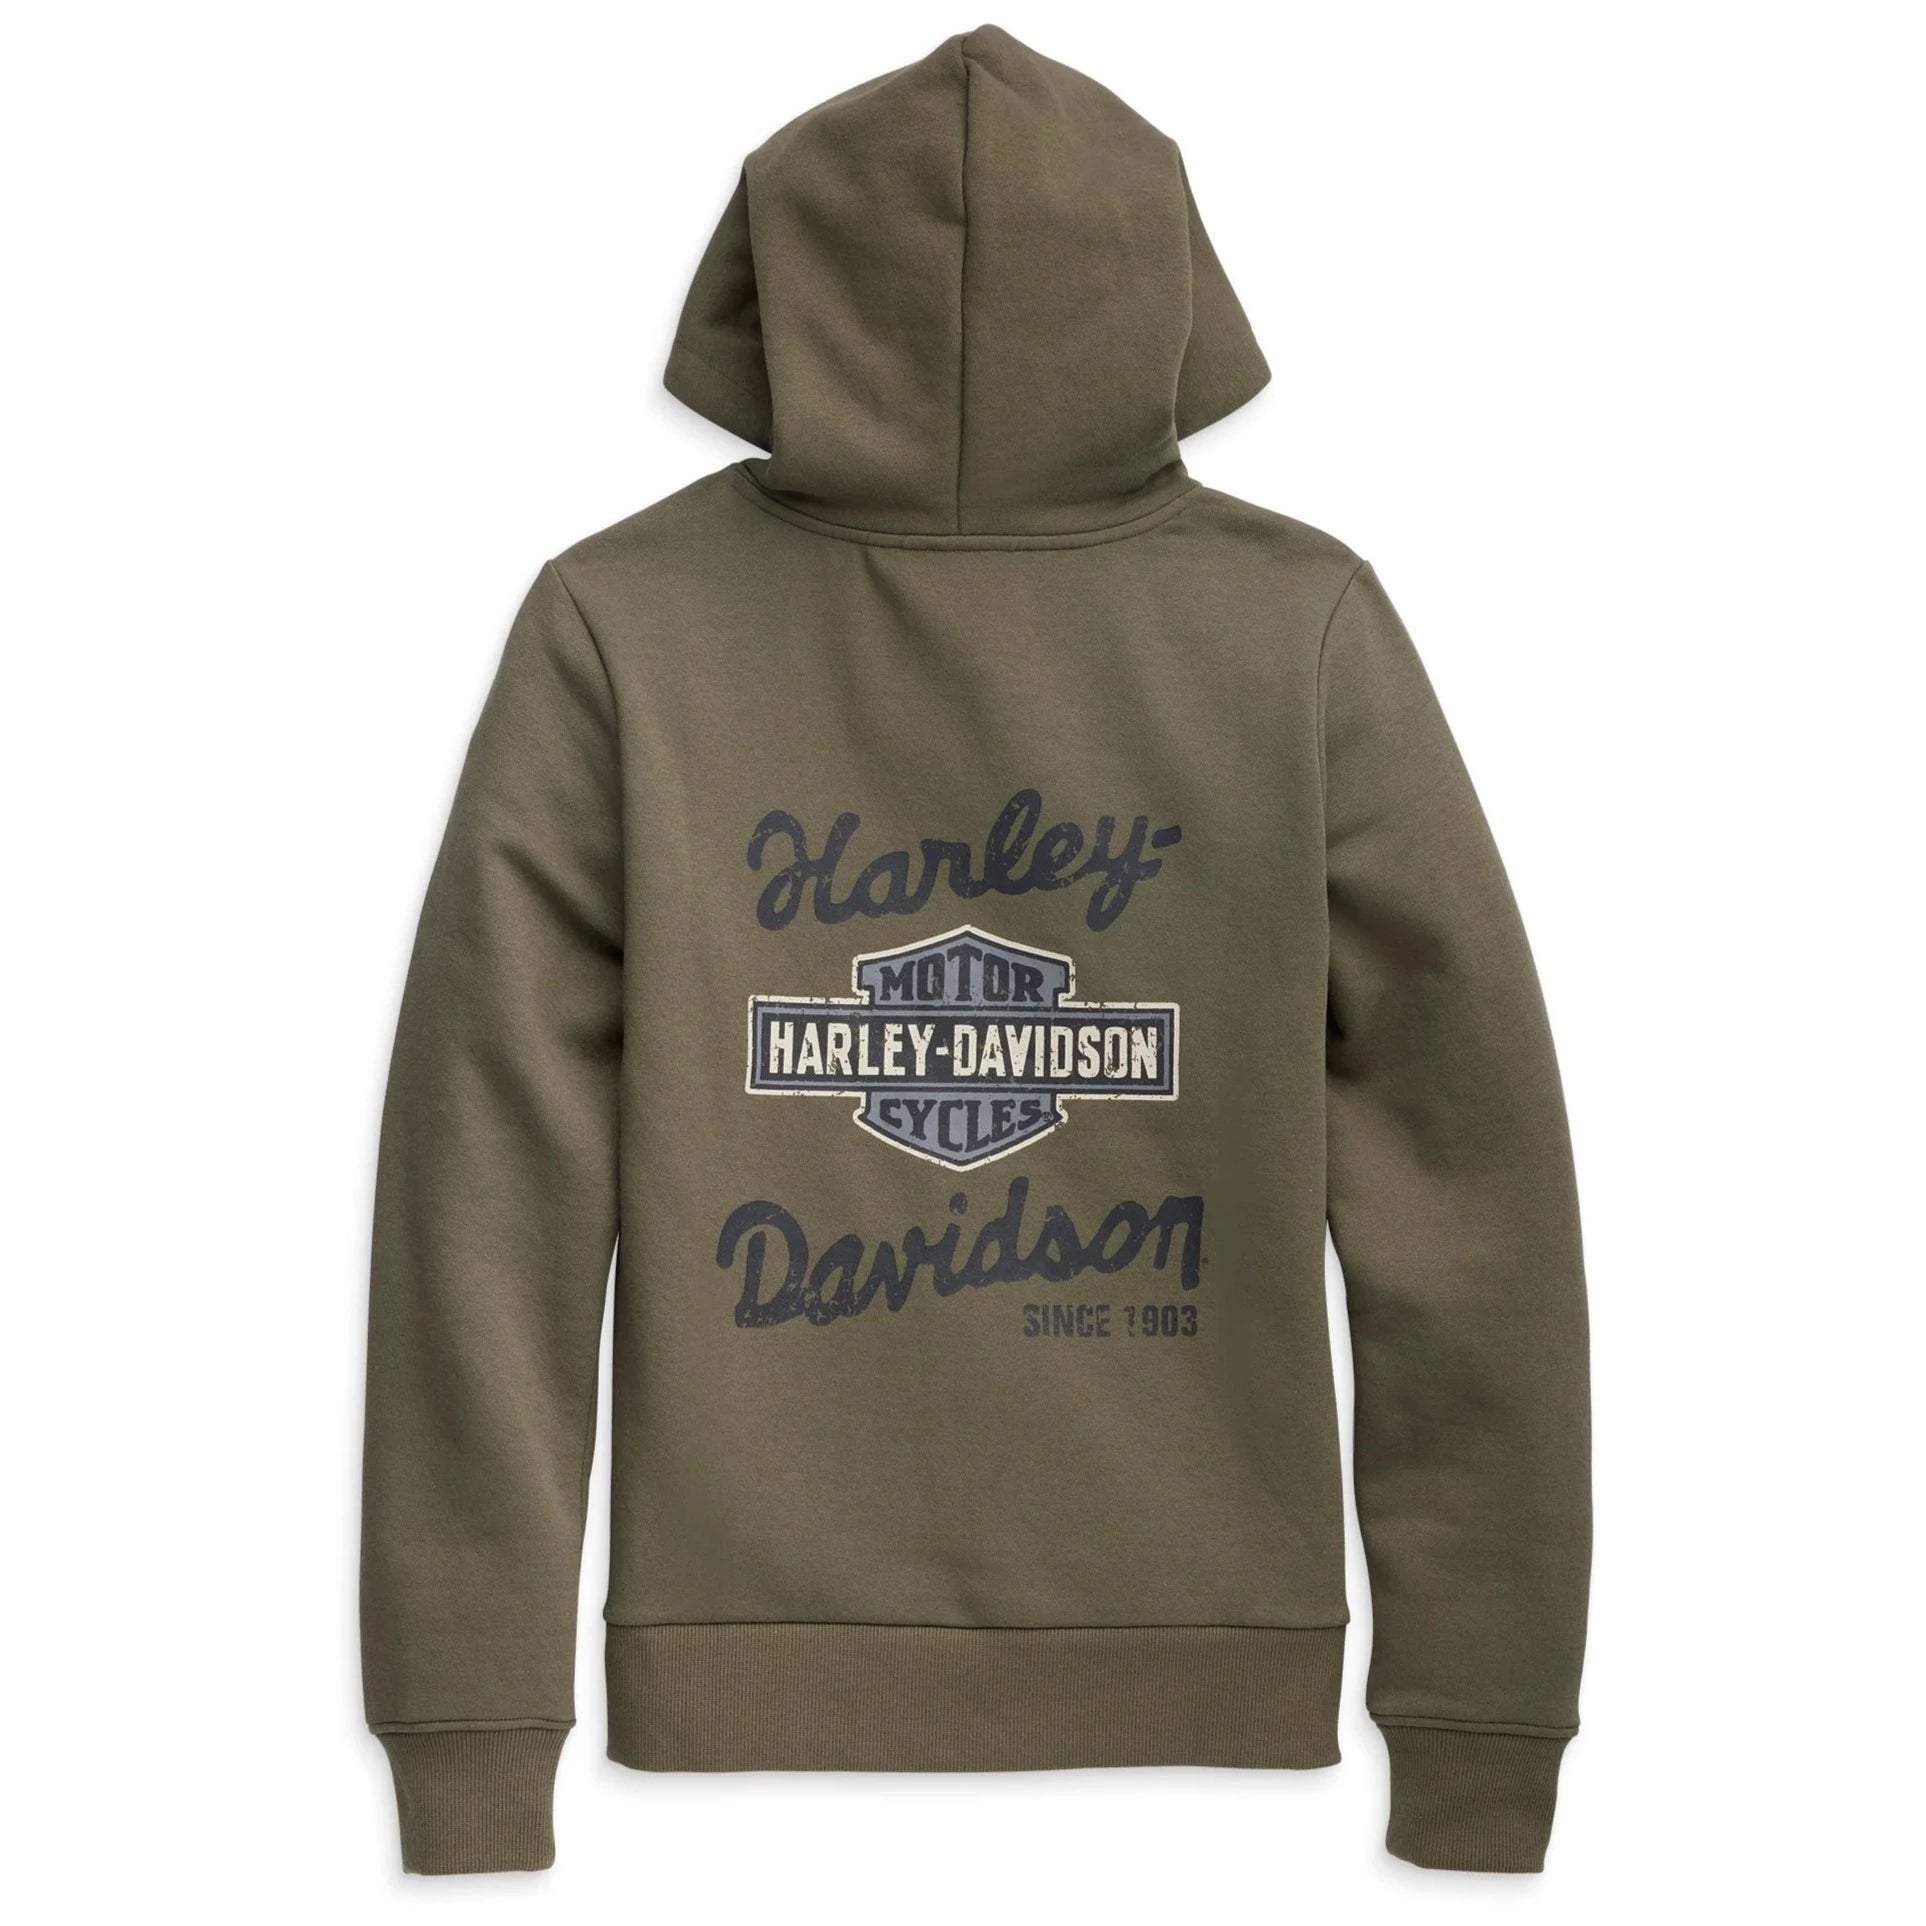 Harley-Davidson Women's Special Machinist Hoodie, 96180-23VW. Olive Green. (Back)